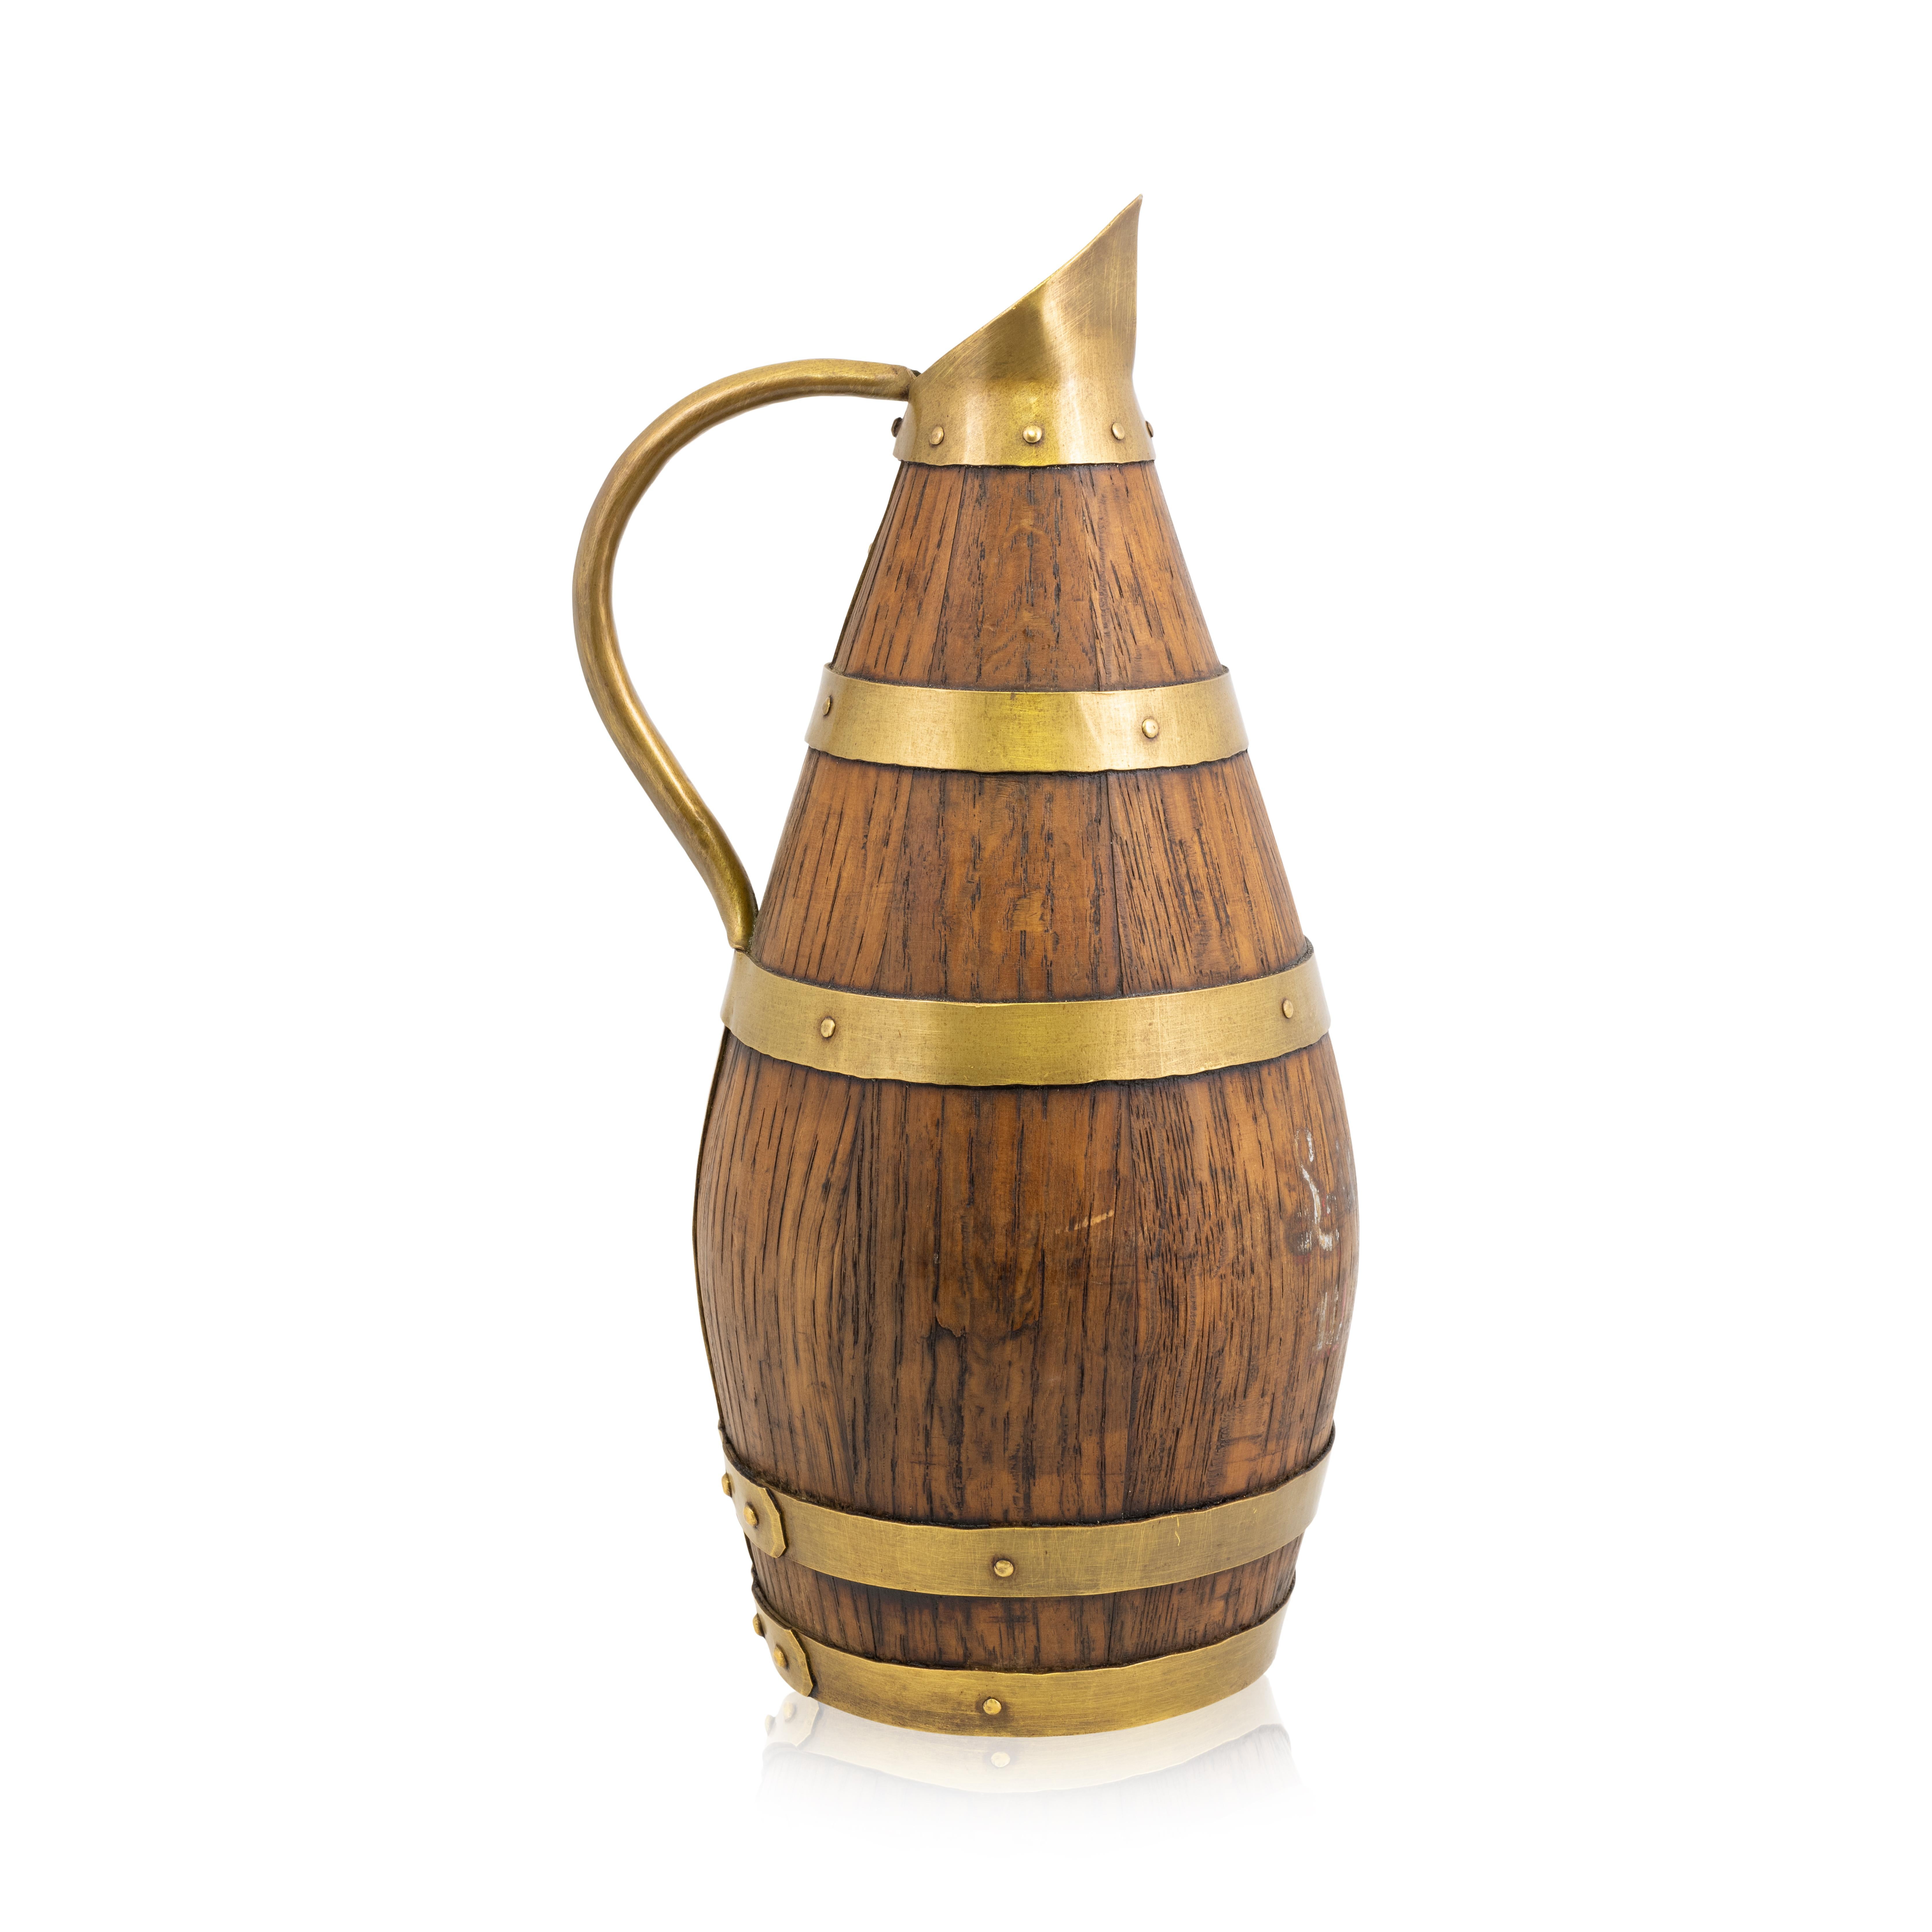 19th Century French alascian wine pitcher of oak with brass banding. A great barware piece!

Period: Last quarter of the 19th century
Origin: France
Size: 11 1/2